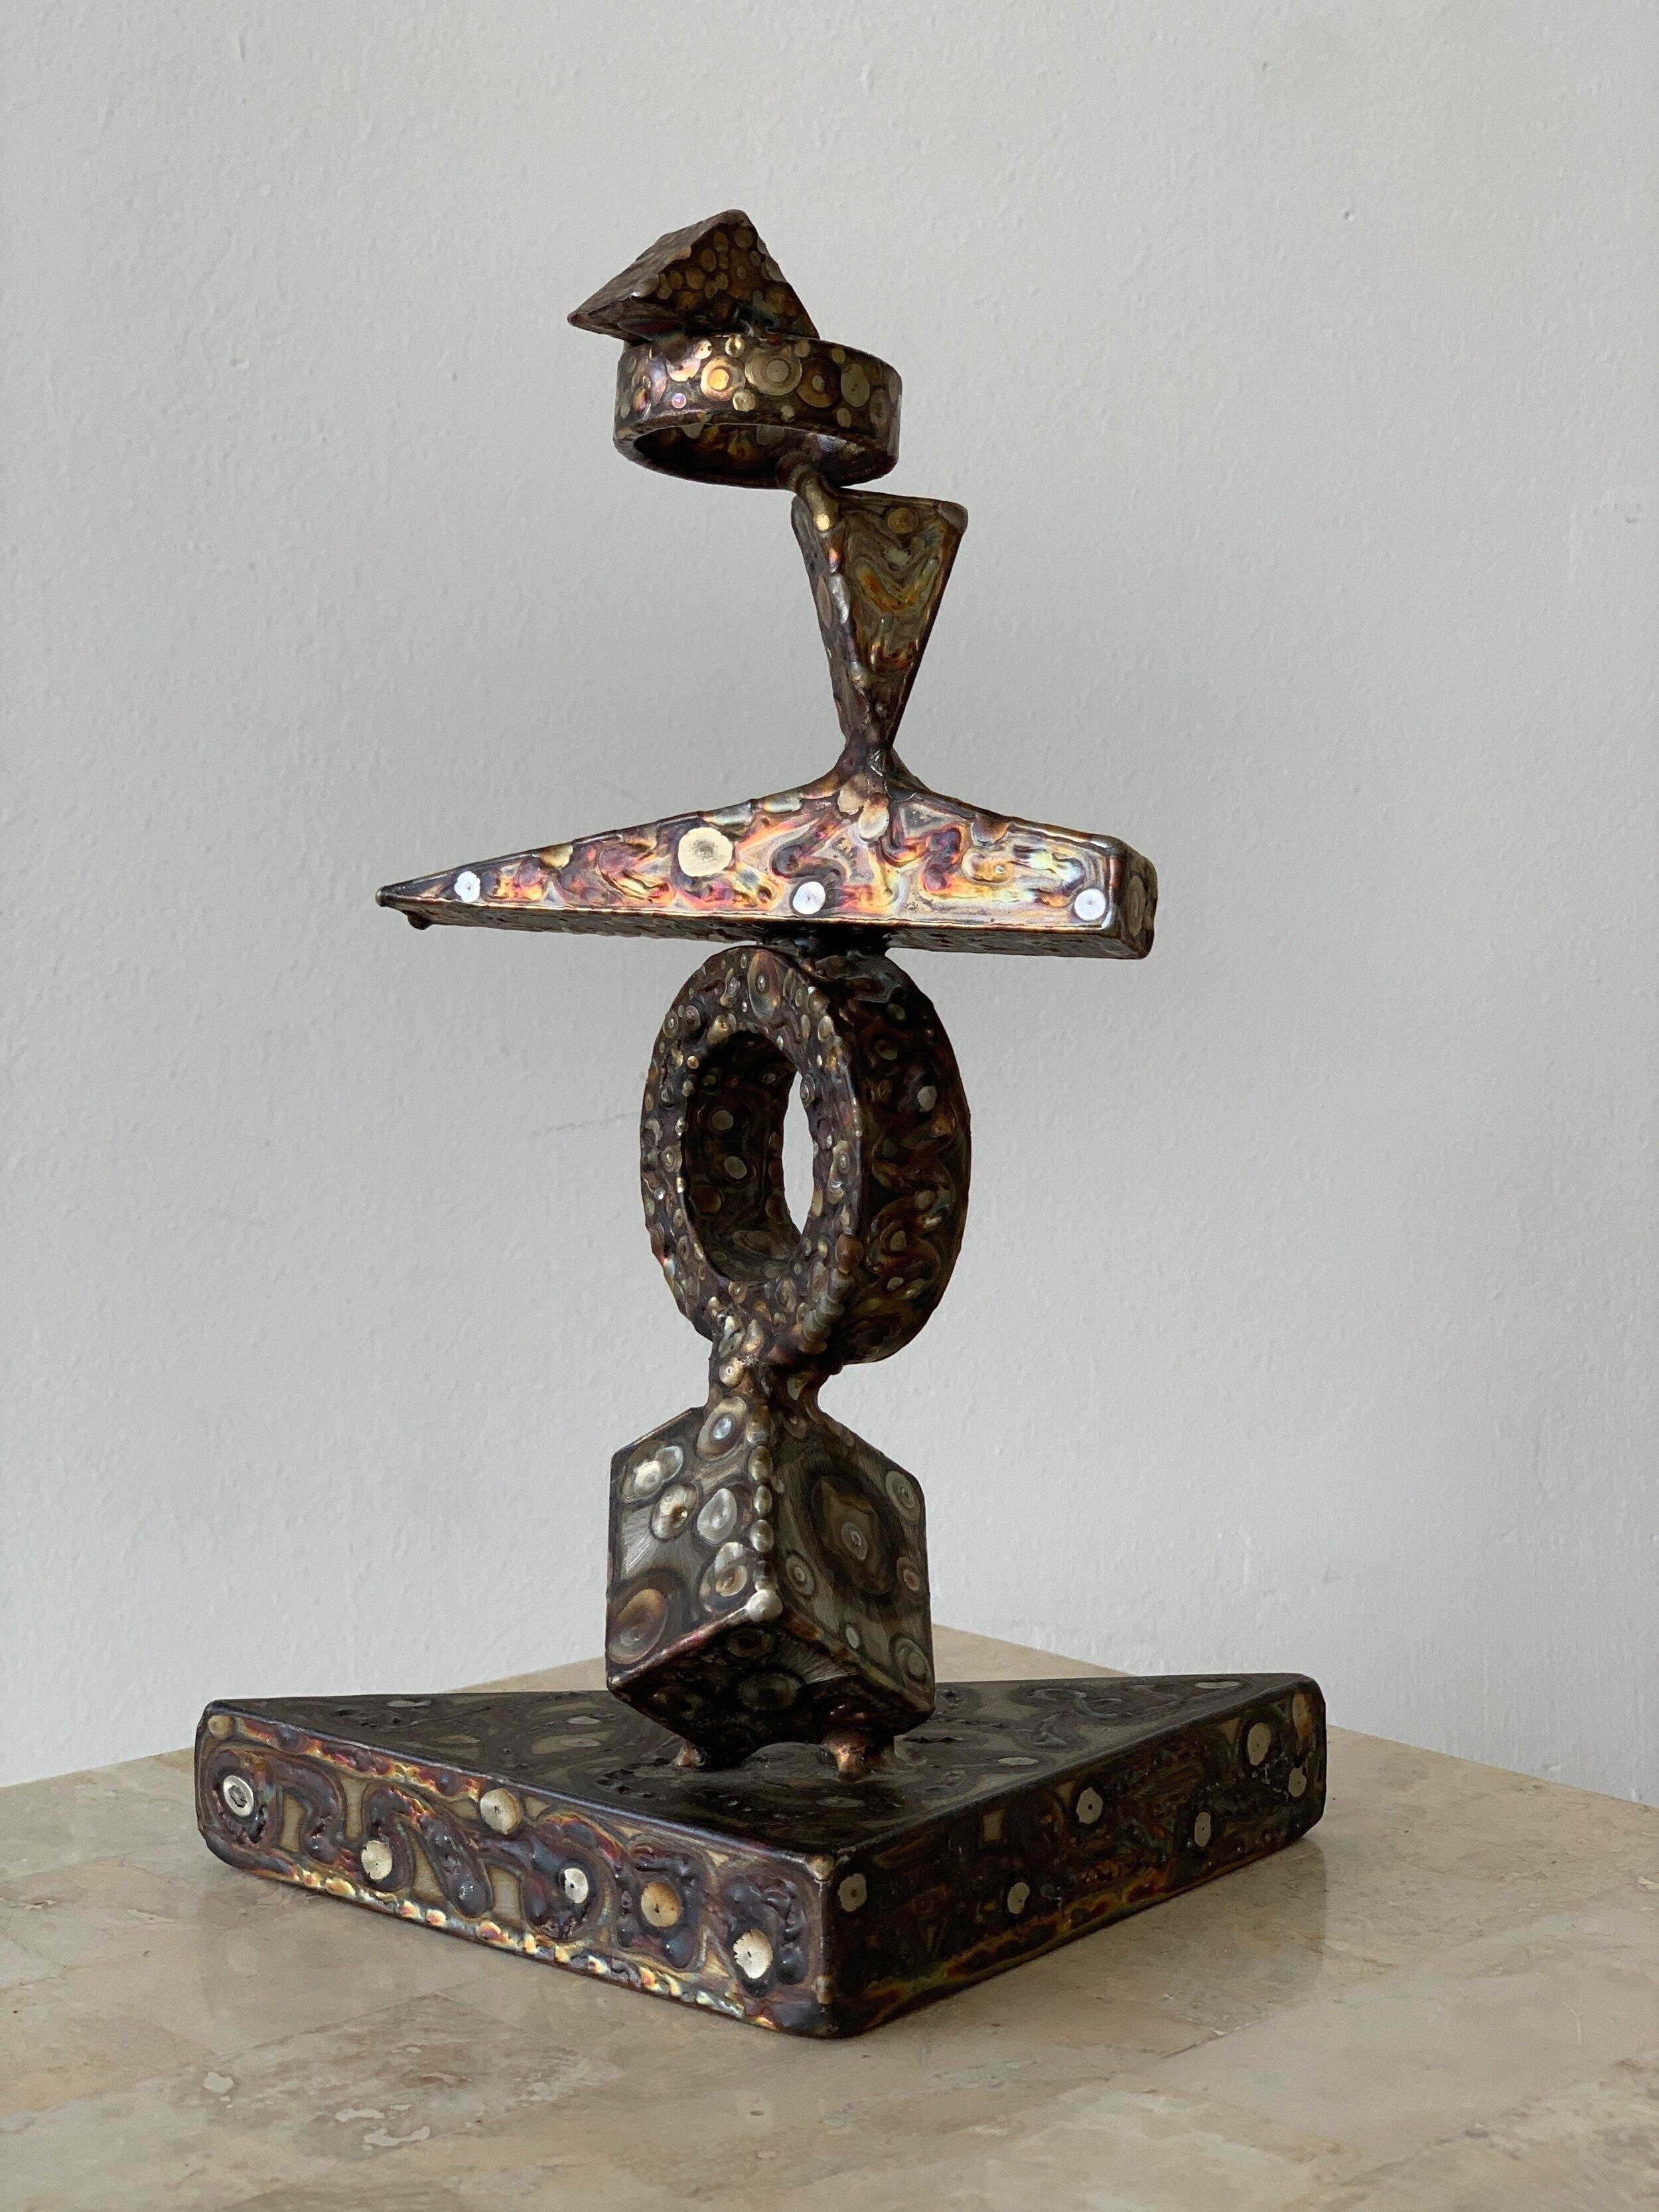 Vintage Signed George Kafka Brutalist Steel Sculpture, circa 1973 In Excellent Condition For Sale In Long Island City, NY